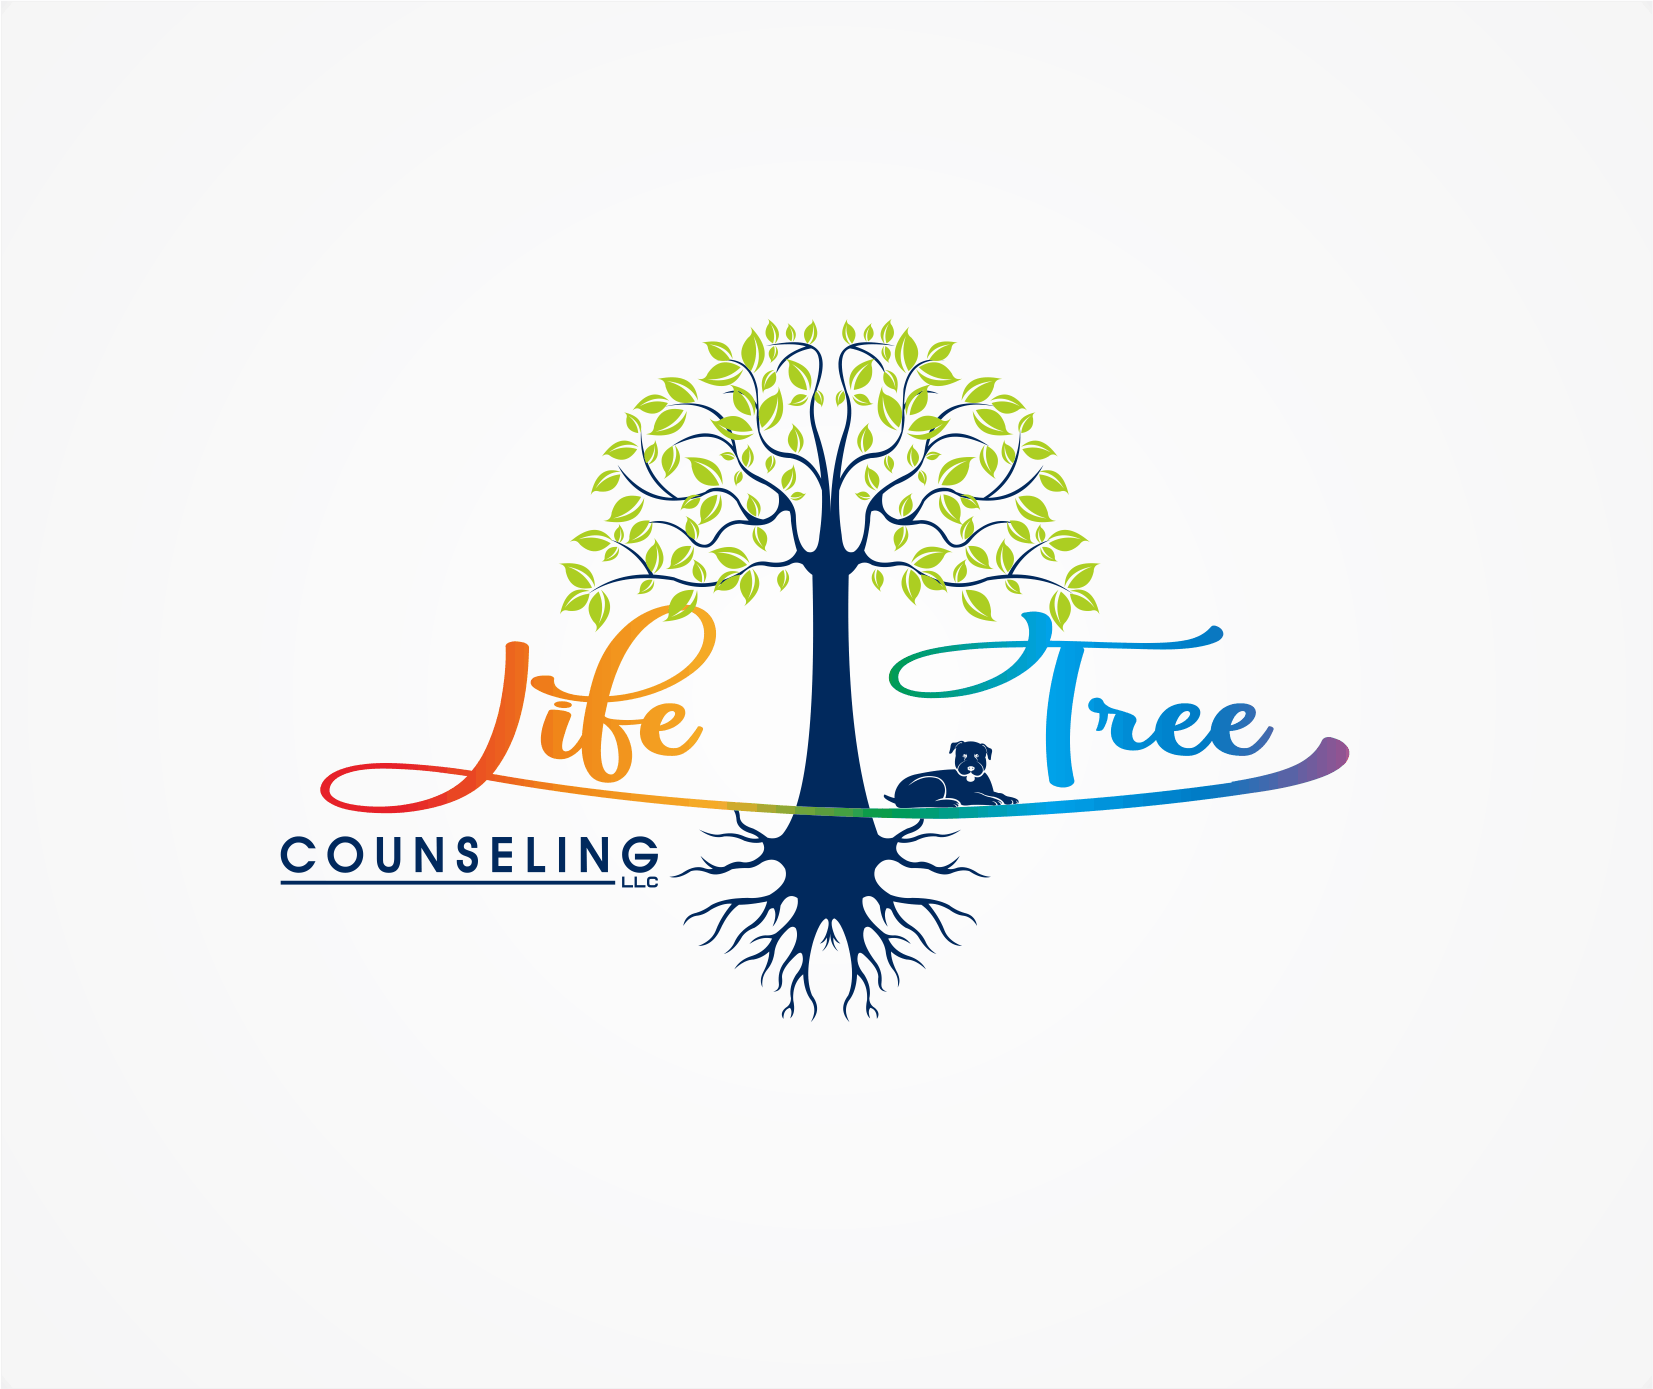 Counselling Logo Vector Images (over 2,100)